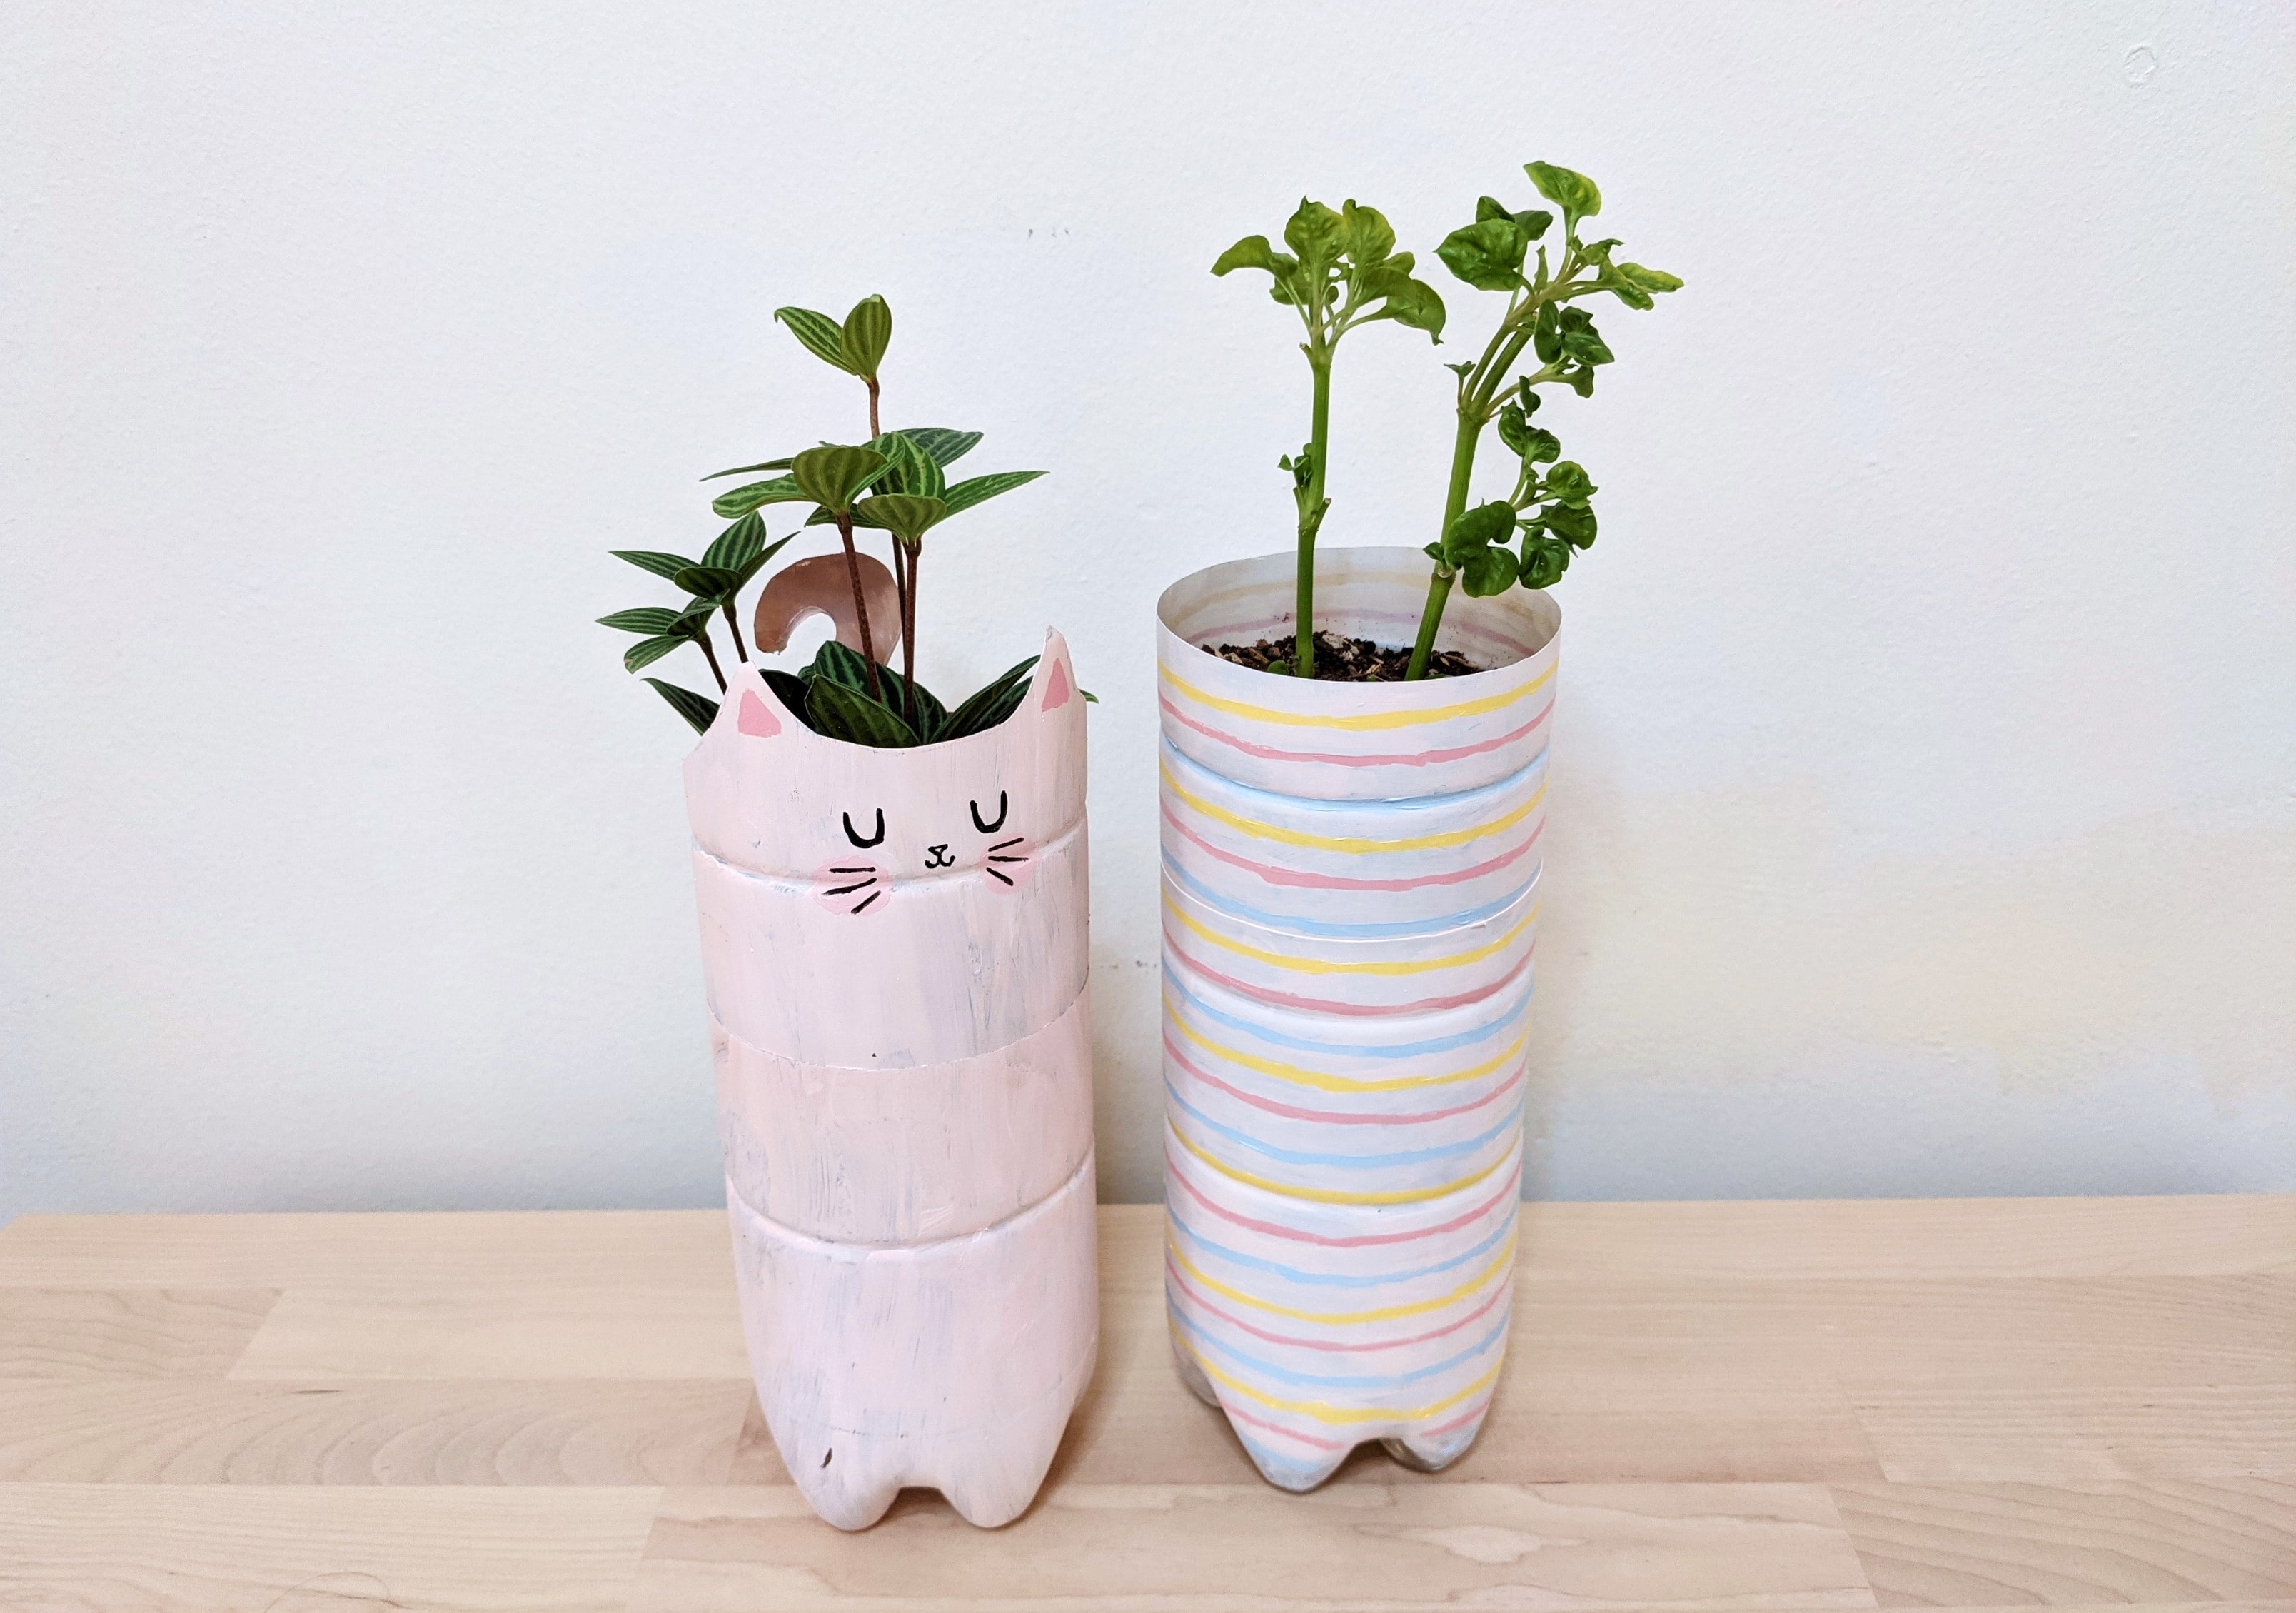 Make Your Own Upcycled Self-Watering Planter